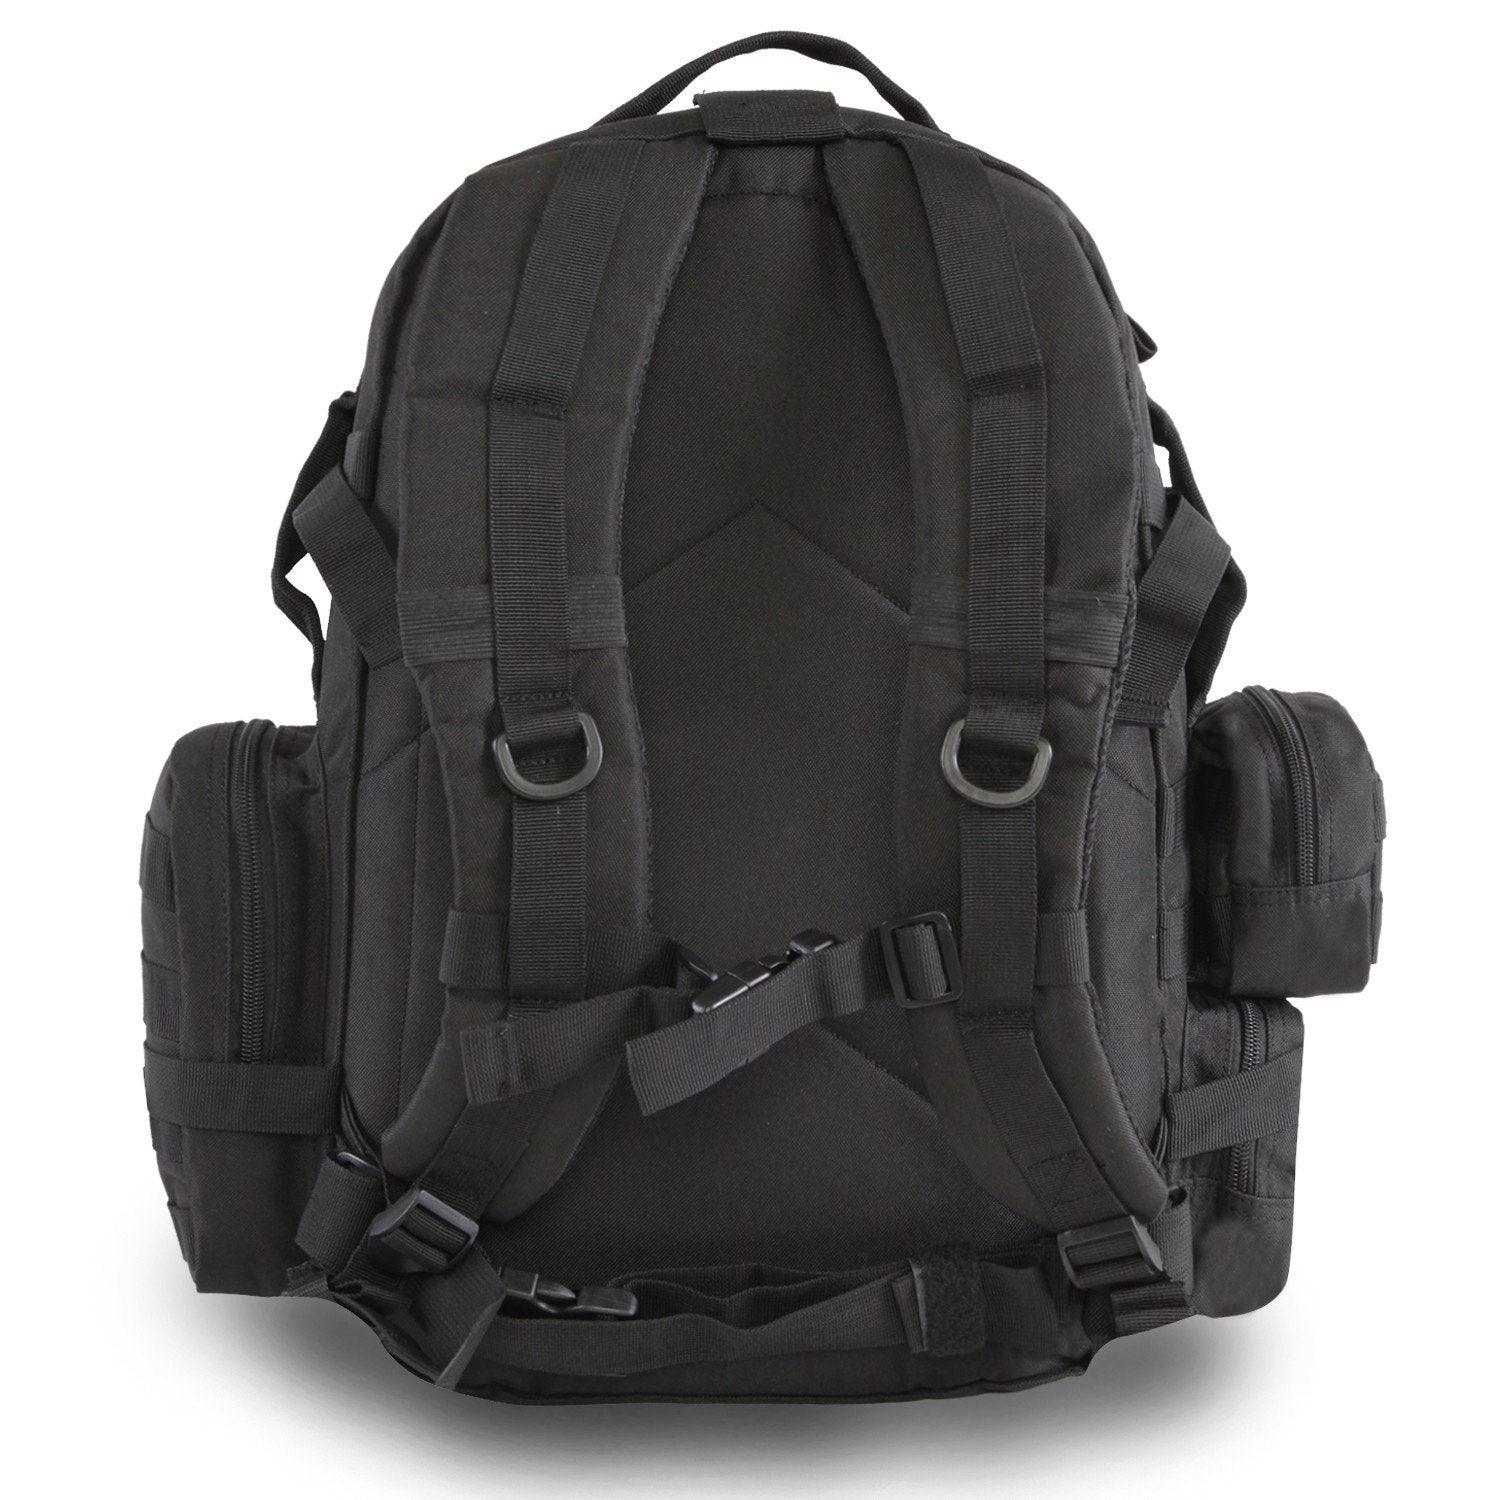 Apollo Tactical Backpack, 2-3 Day Backpack, MOLLE Gear